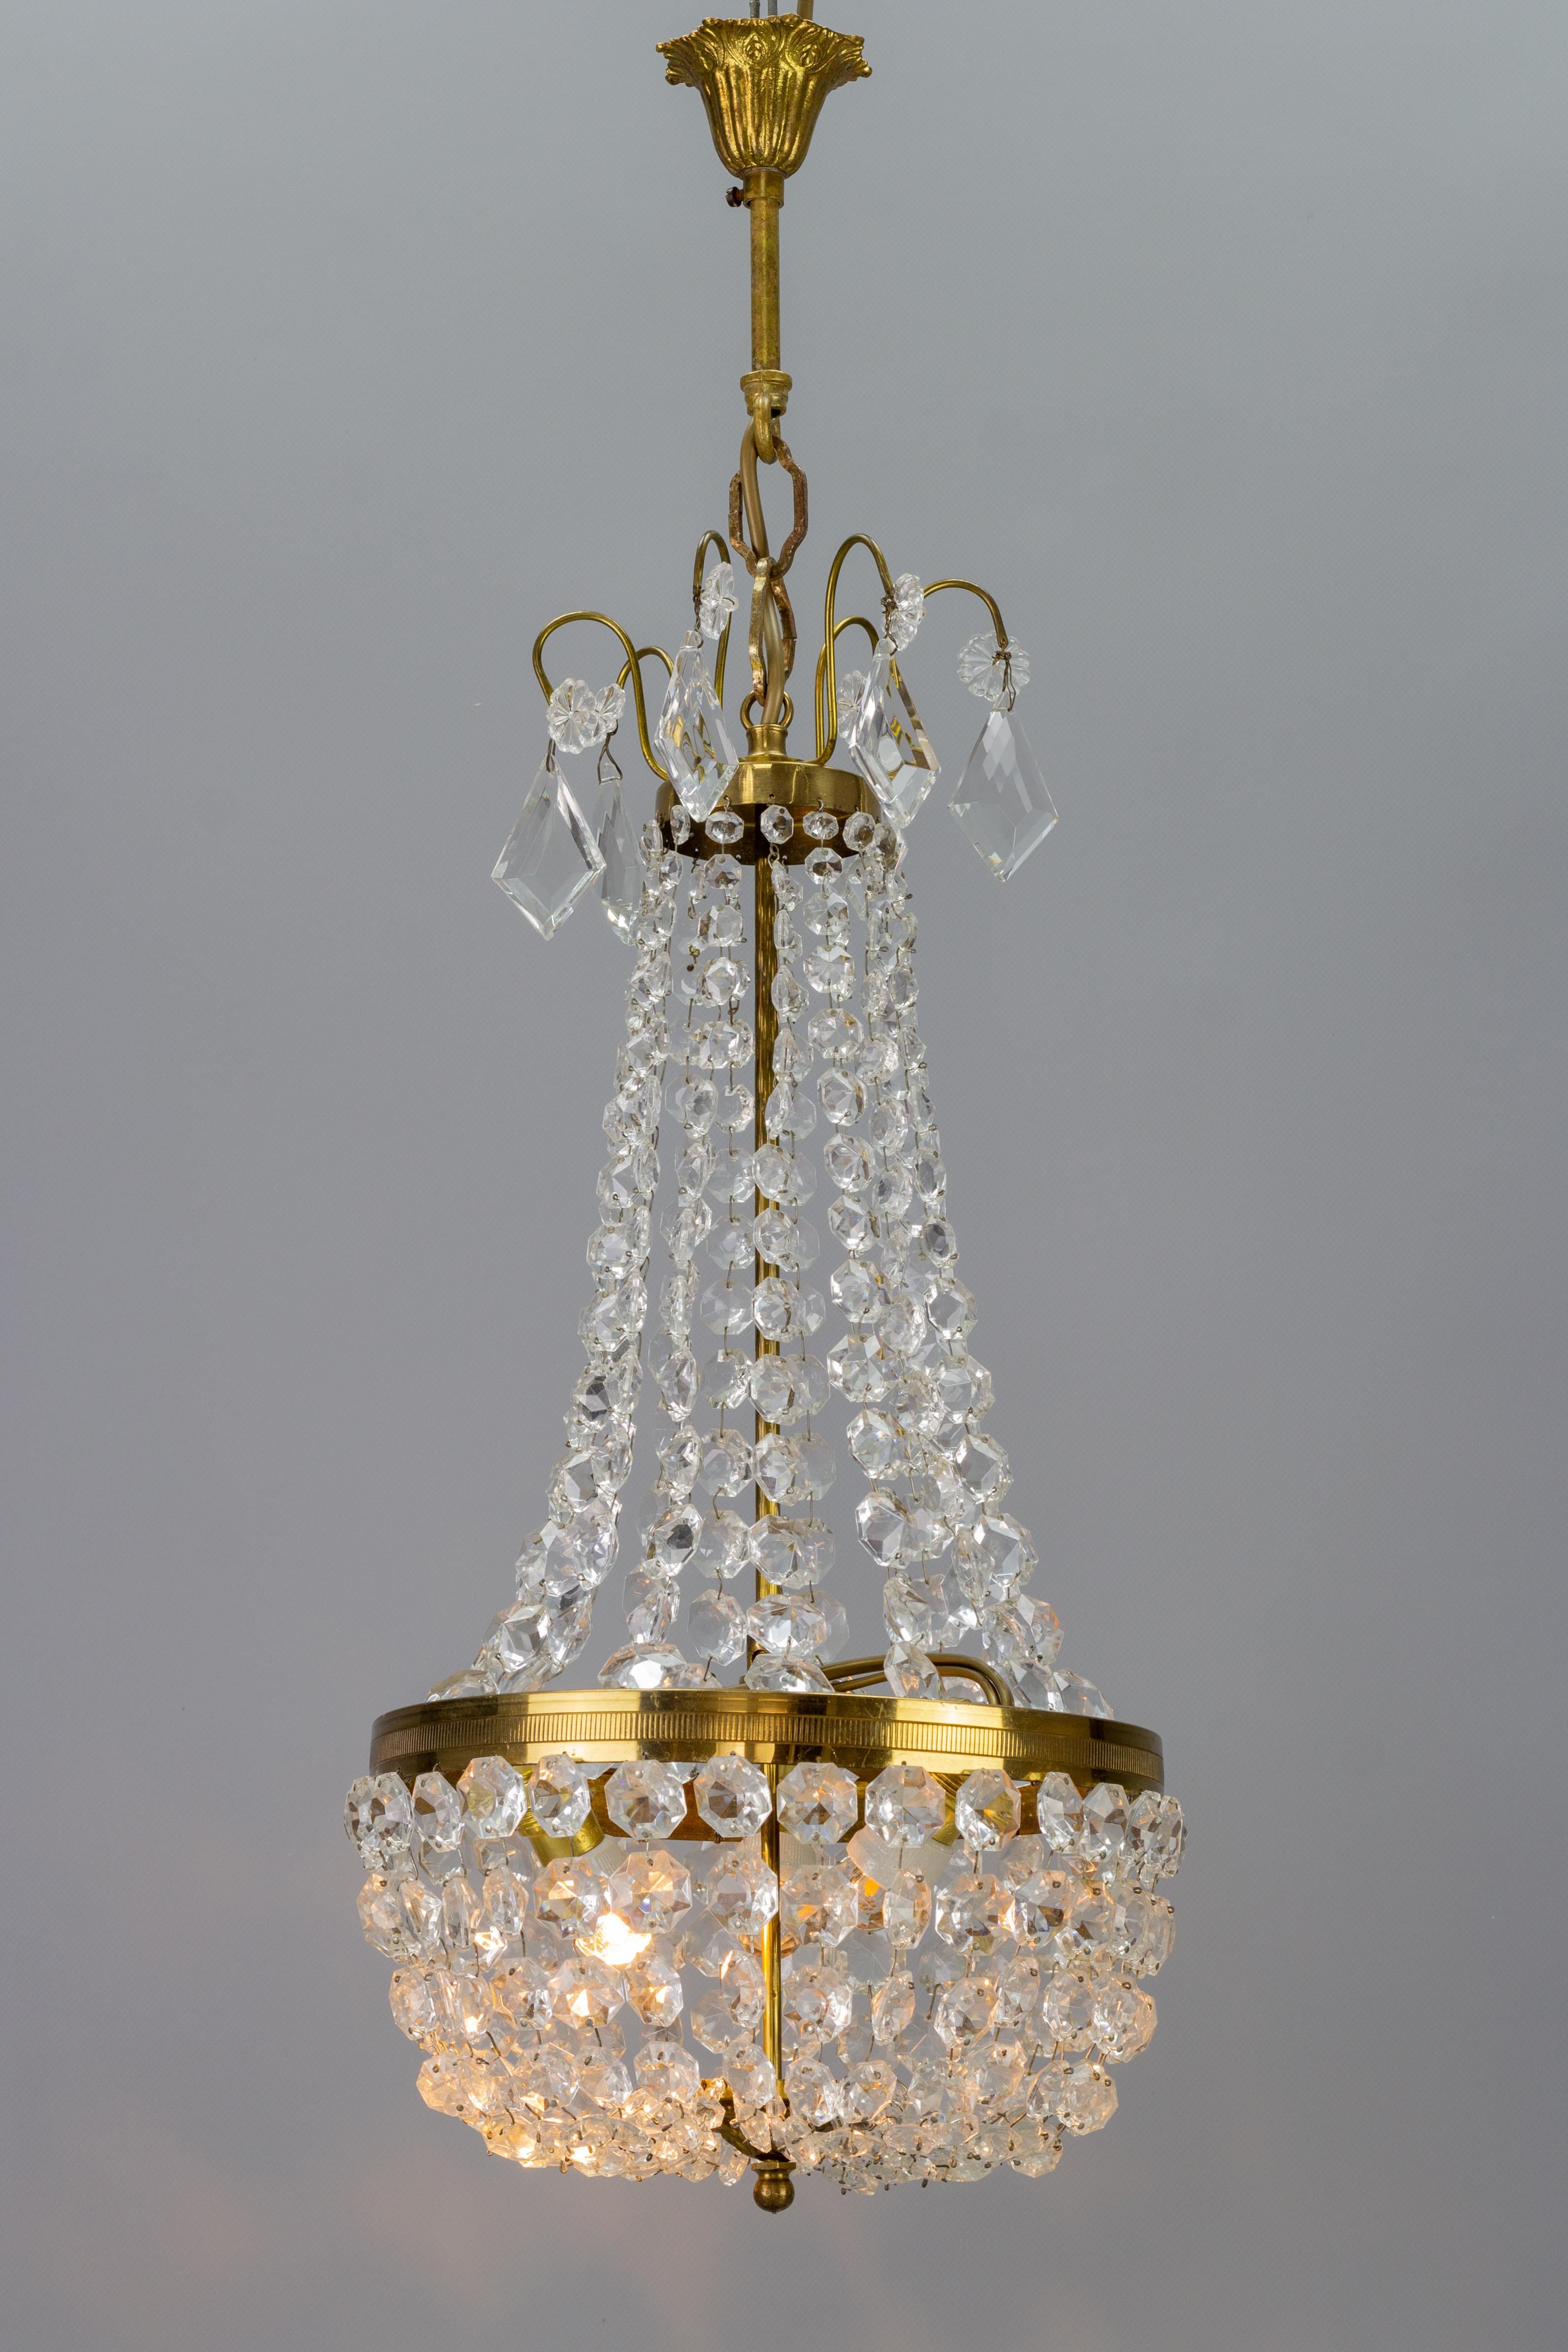 Adorable French Empire-style crystal glass and brass chandelier from the 1950s. This lovely piece has a brass and metal frame hung with chains of crystal glass beads forming a basket and reflecting the light beautifully. Adorned with hanging crystal